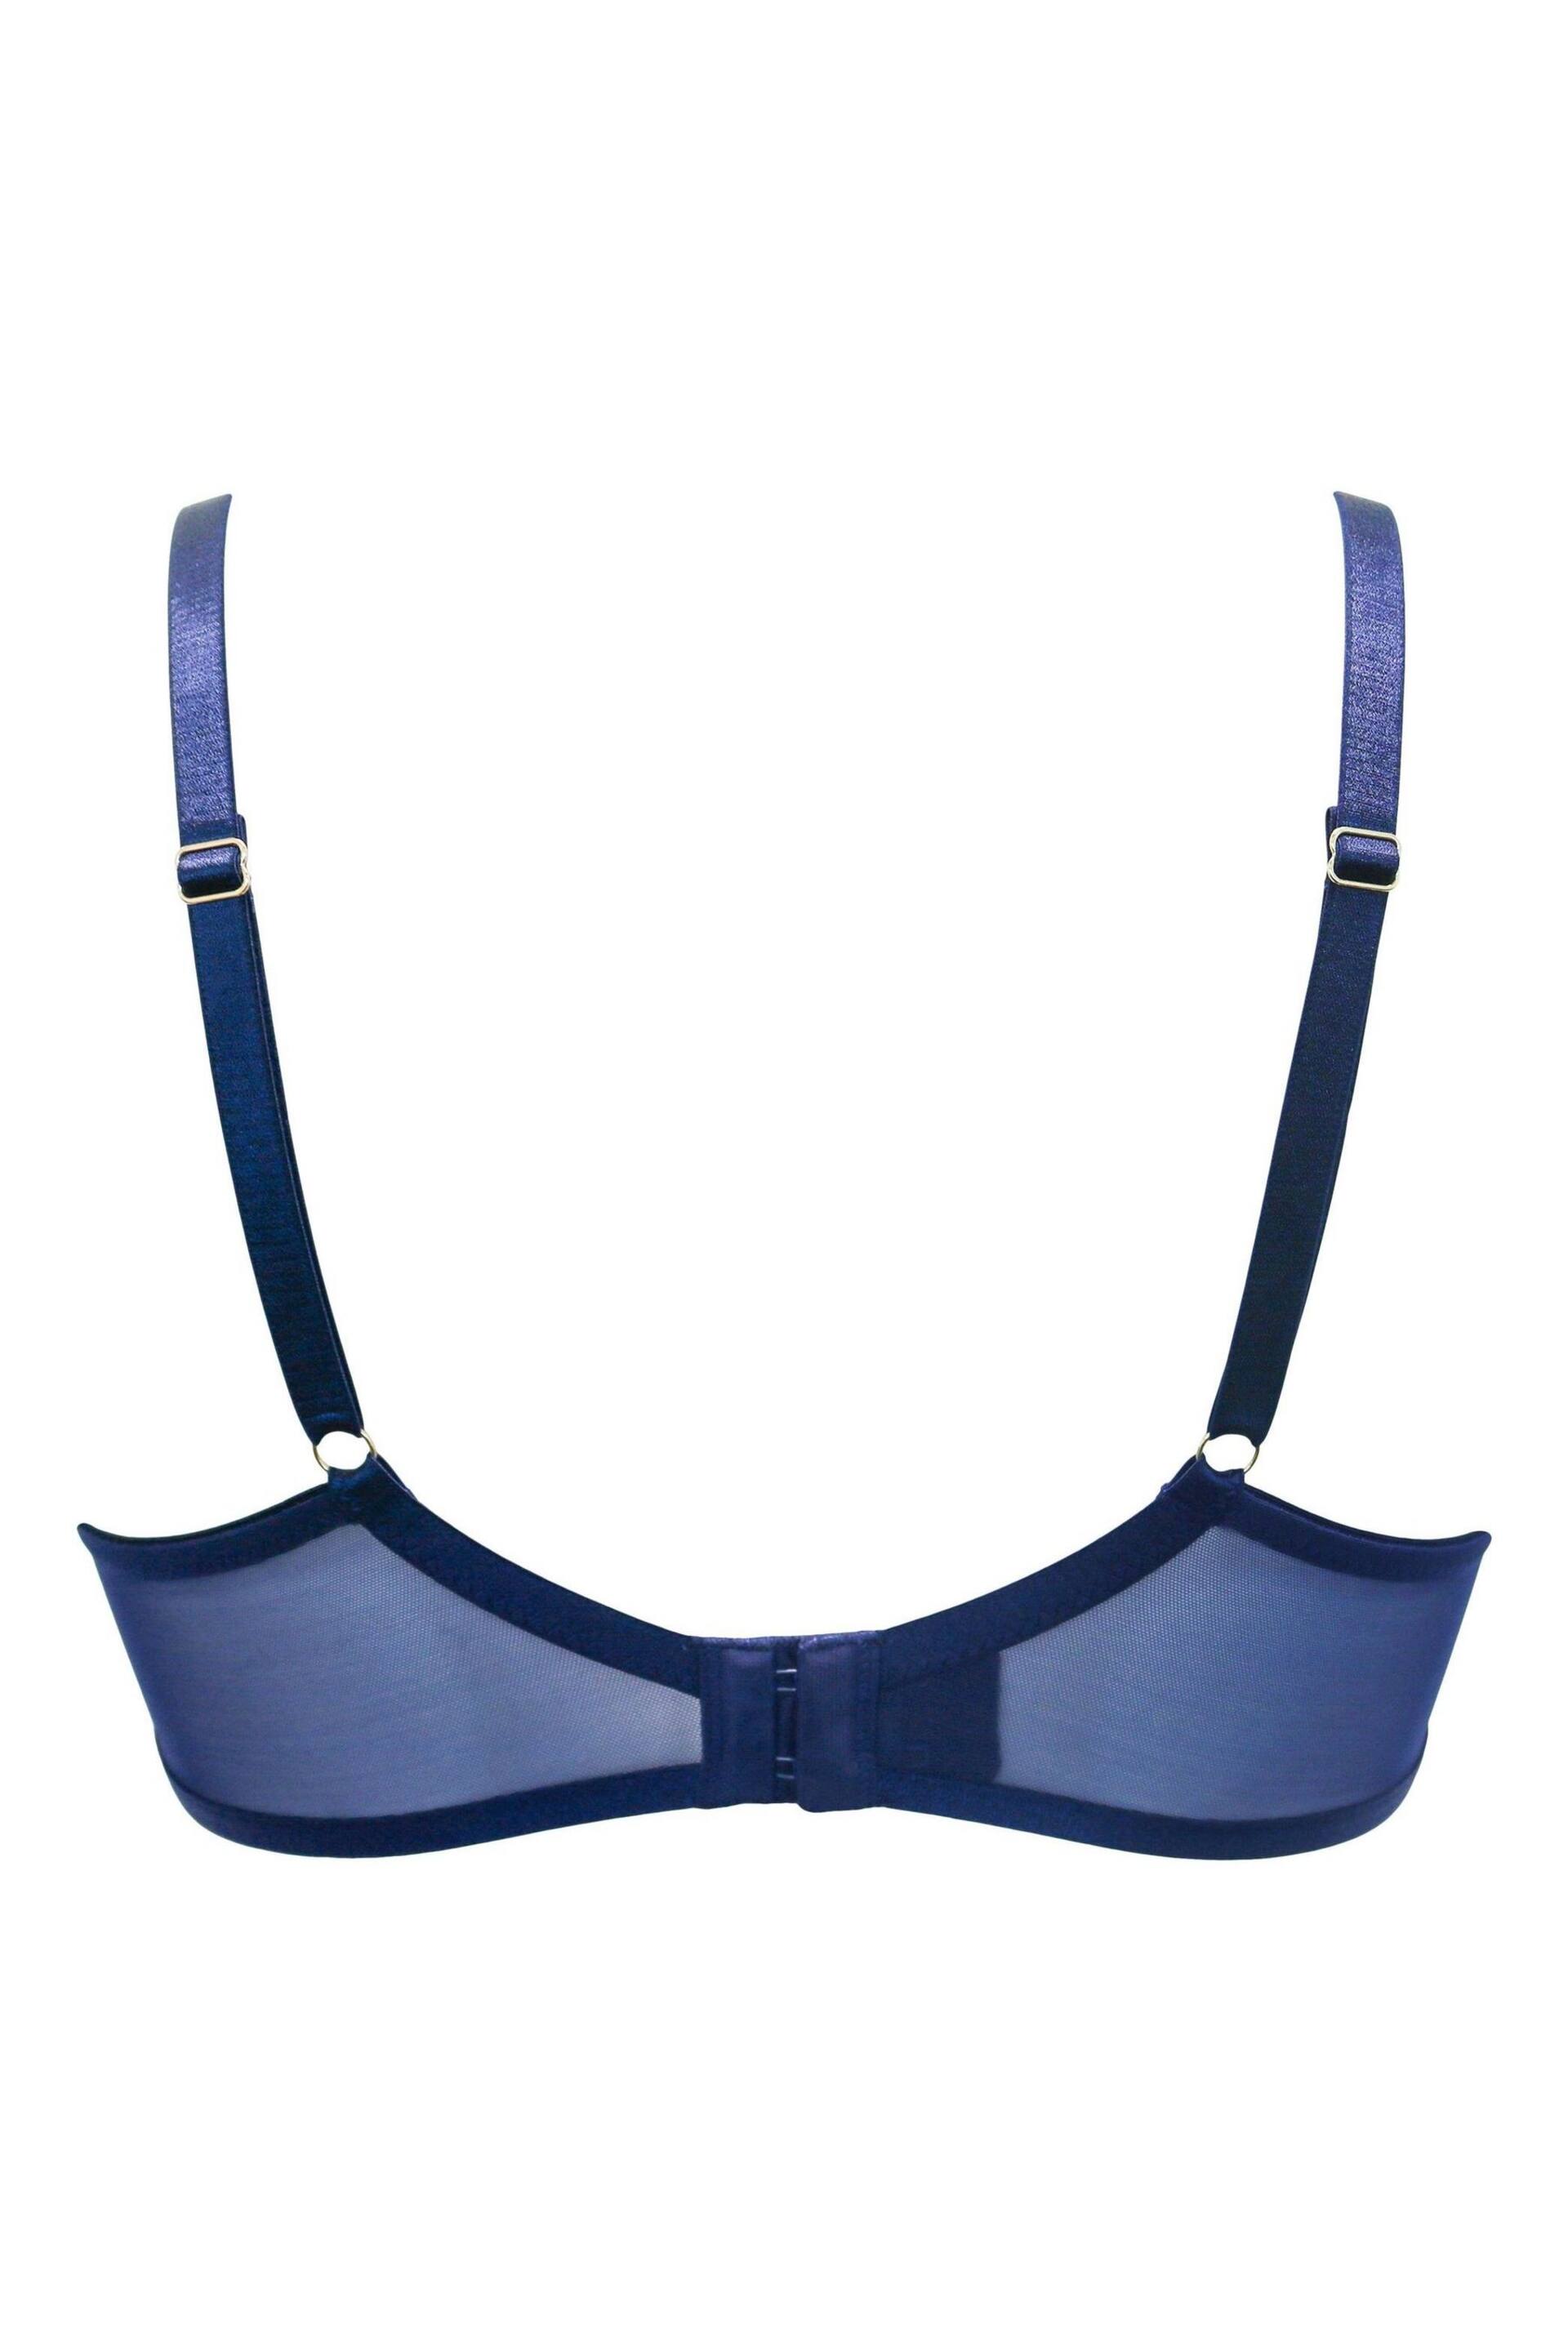 Pour Moi Blue Non Padded Viva Luxe Underwired Bra - Image 4 of 4